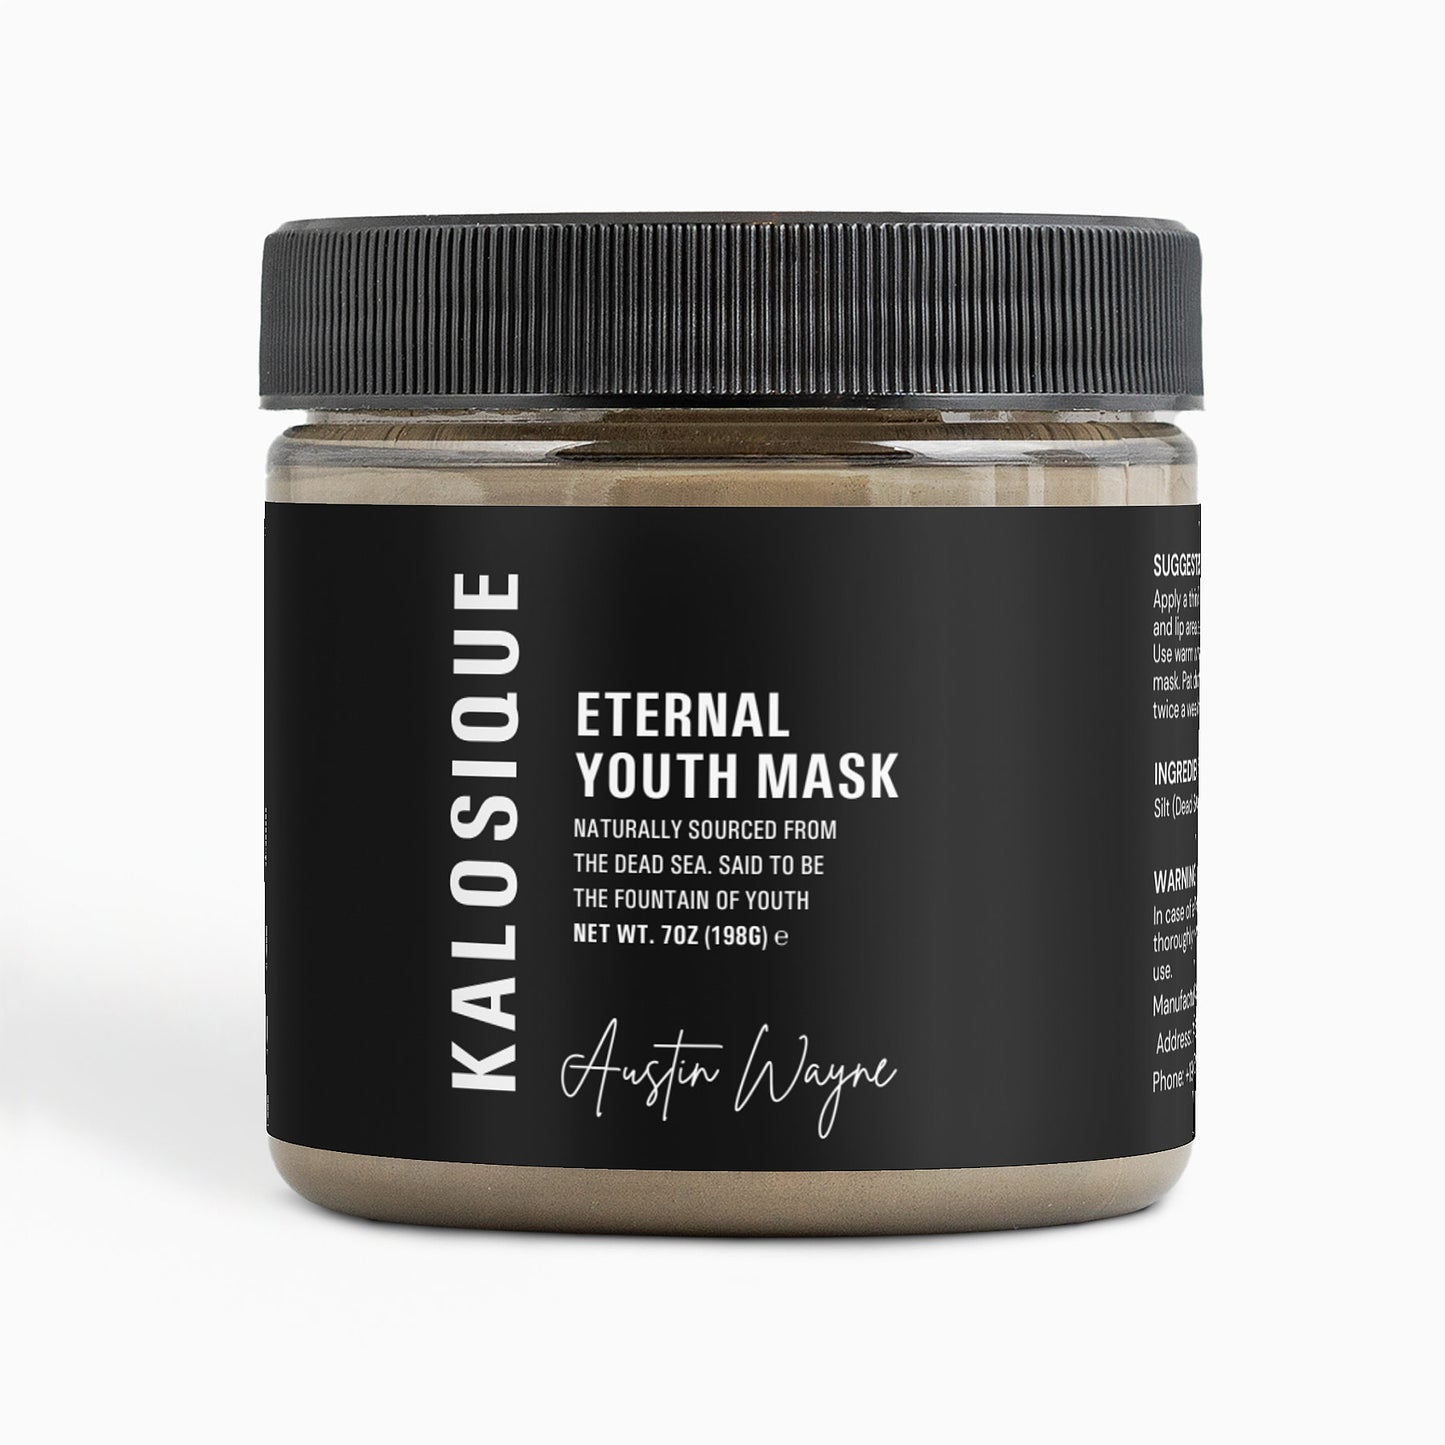 ETERNAL YOUTH MASK